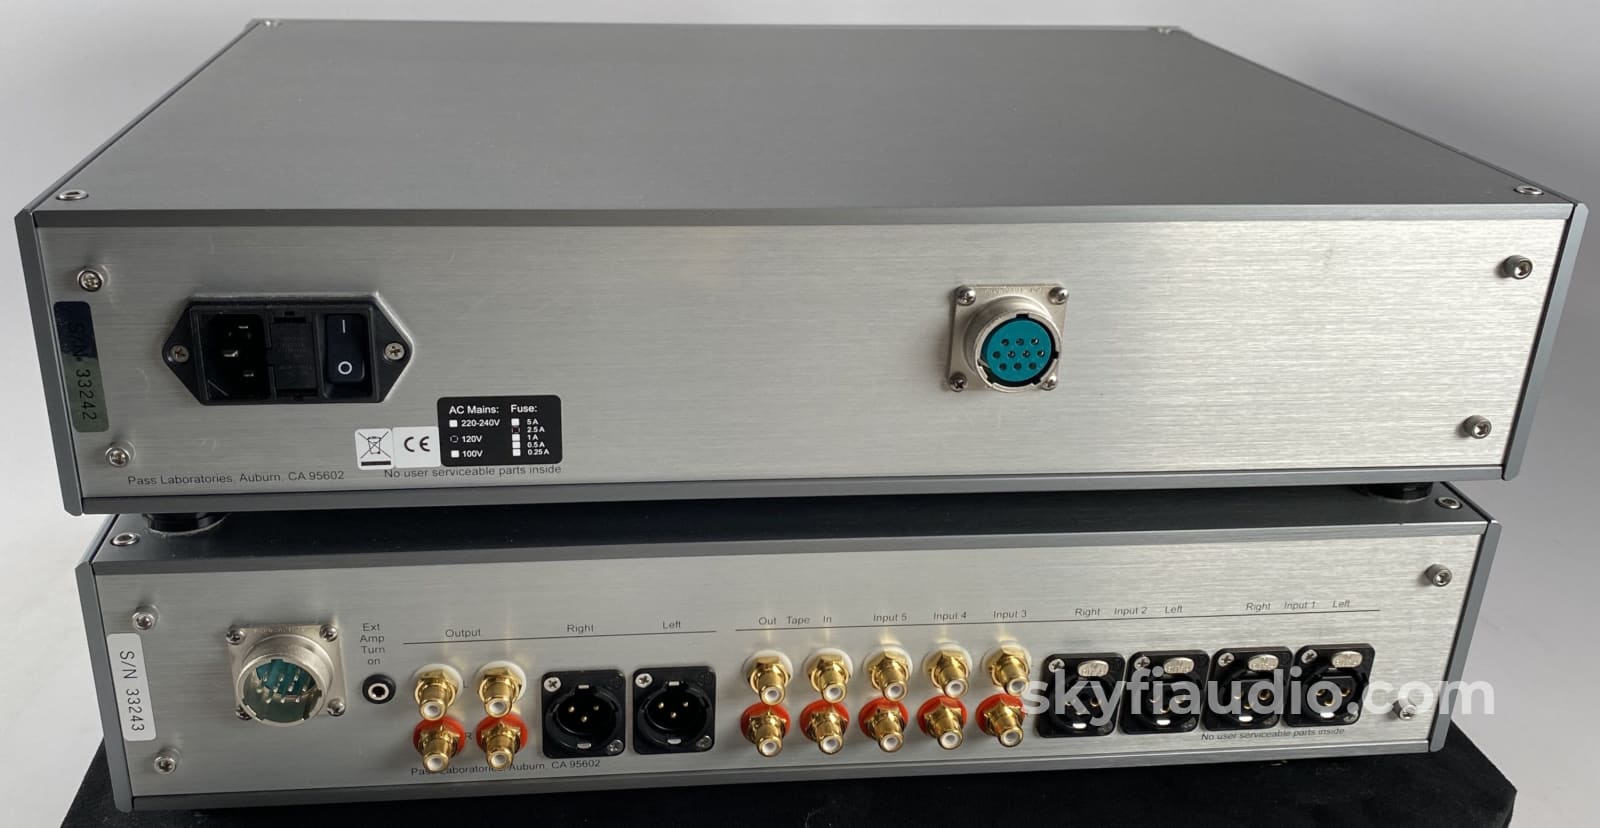 Pass Labs Xp-22 Dual Chassis Analog Preamp - Like New Preamplifier